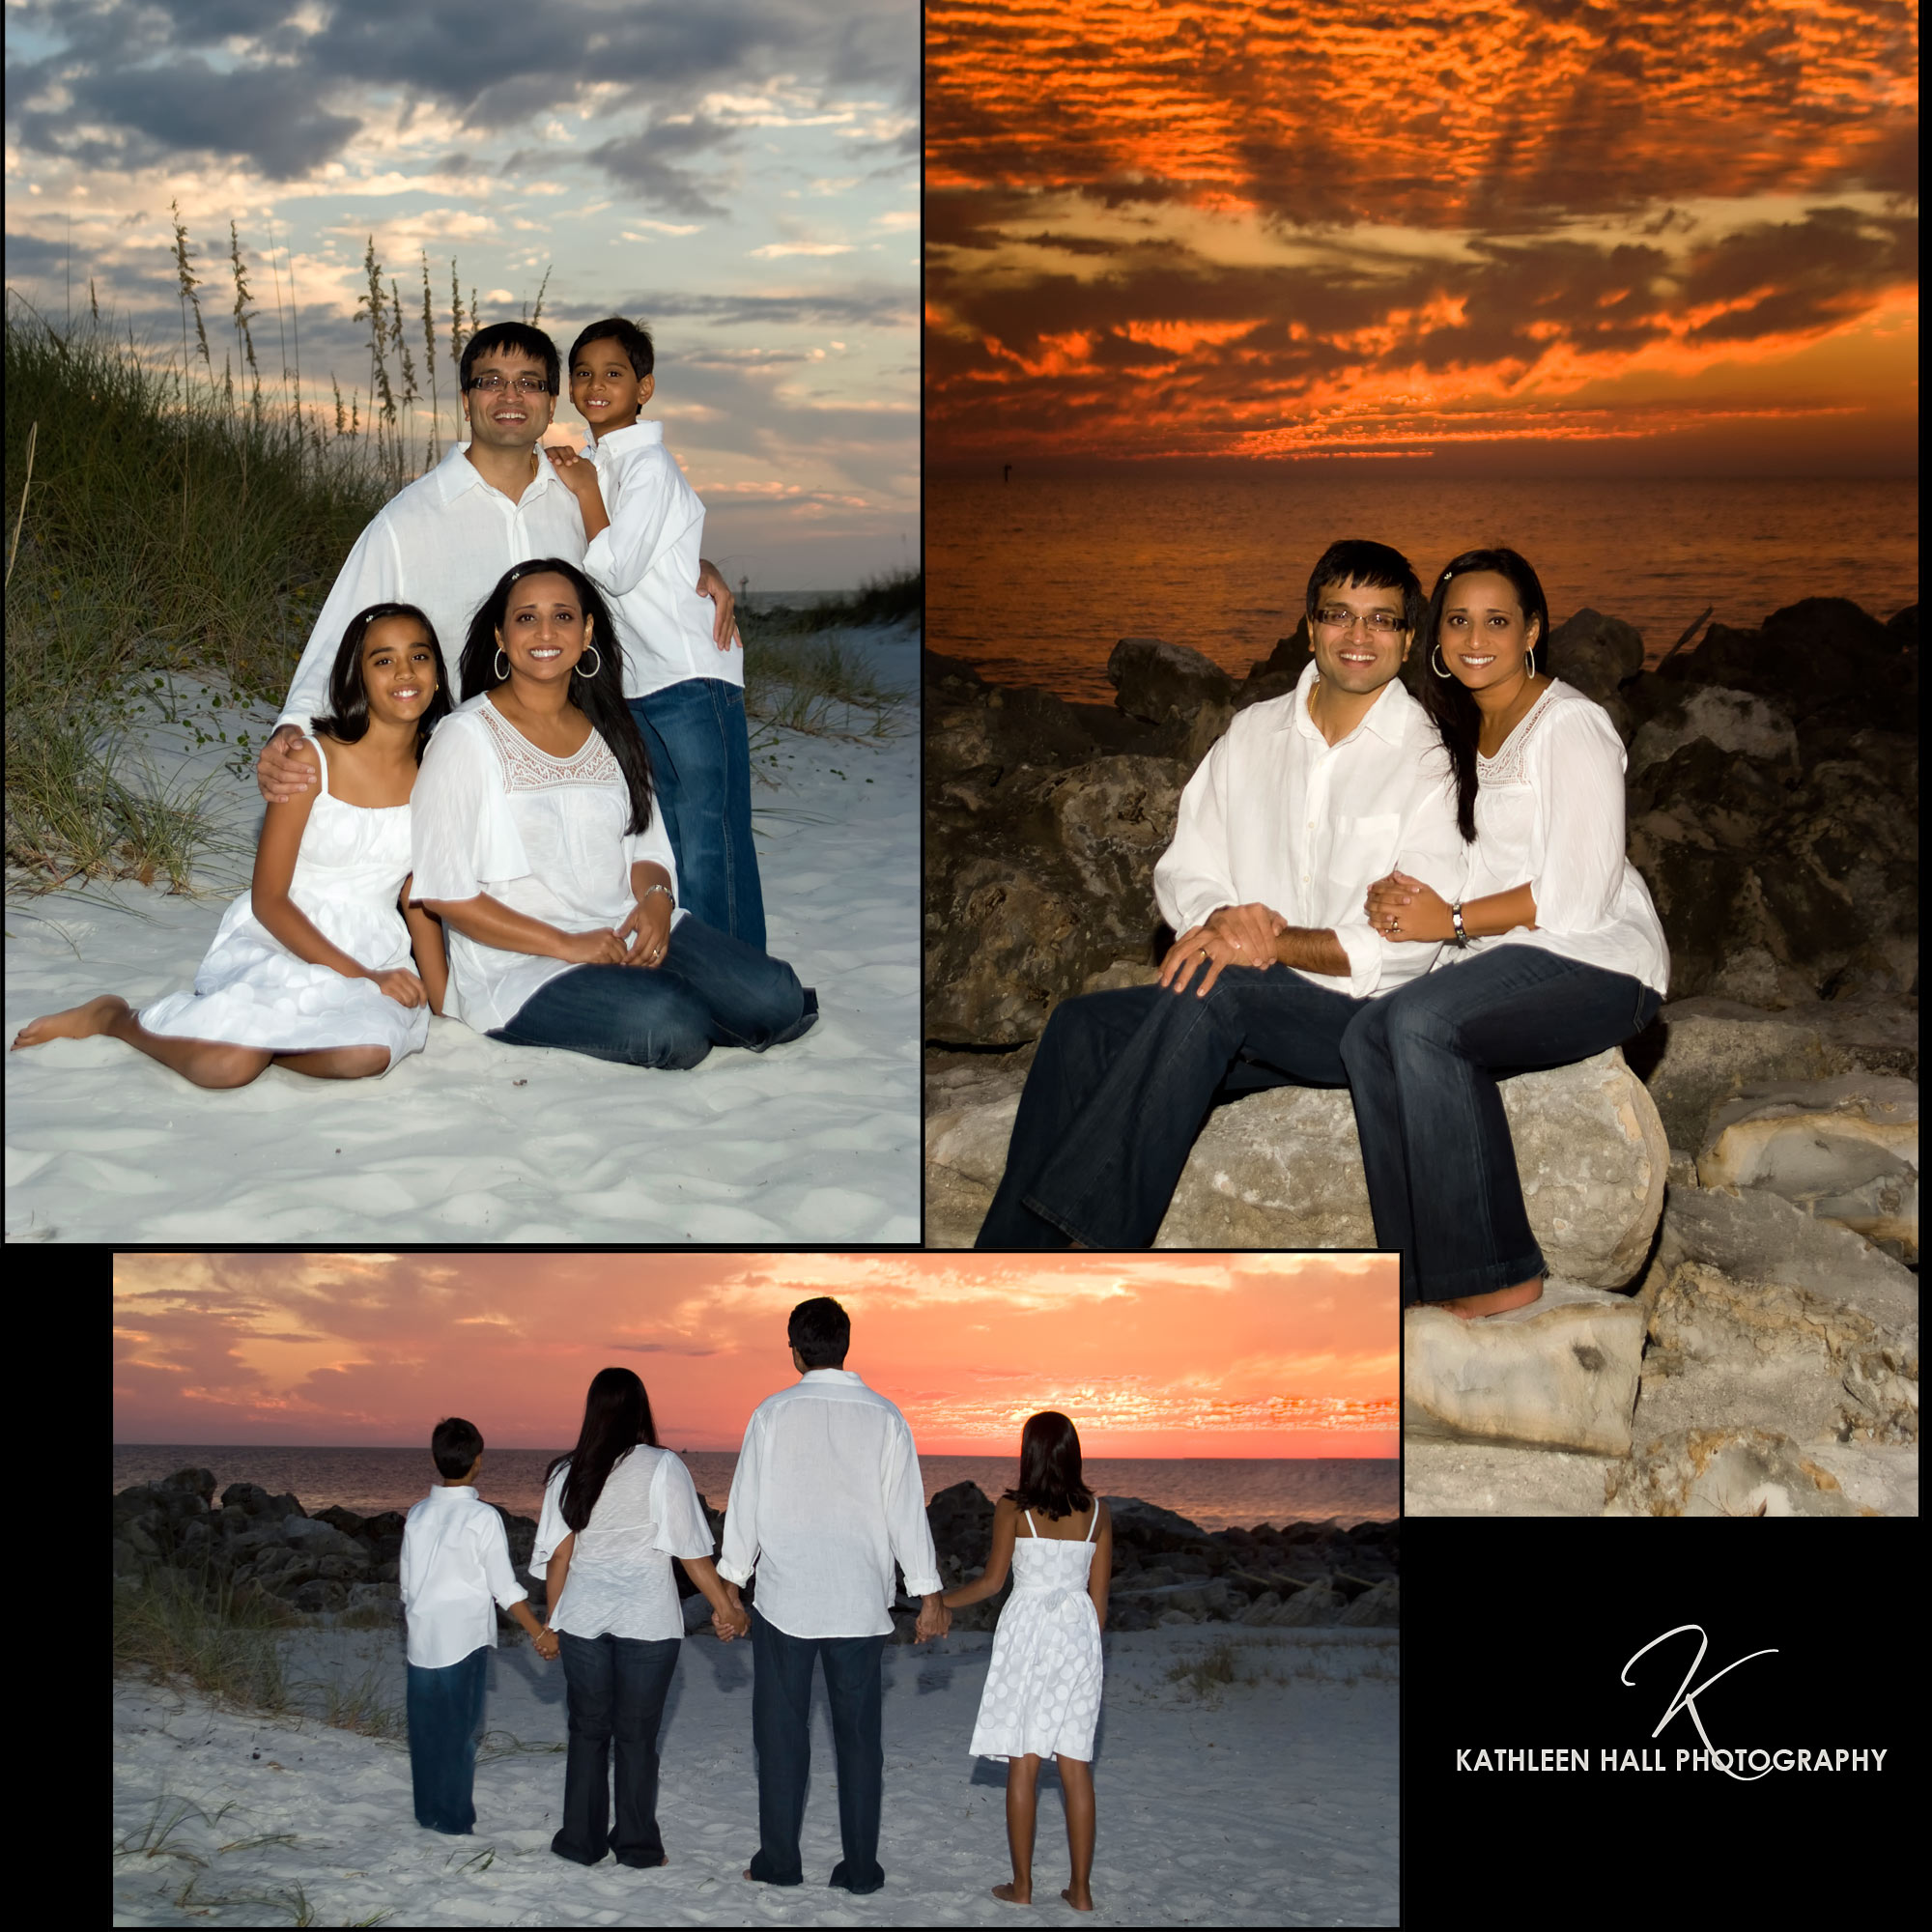 Clearwater Beach sunset portraits